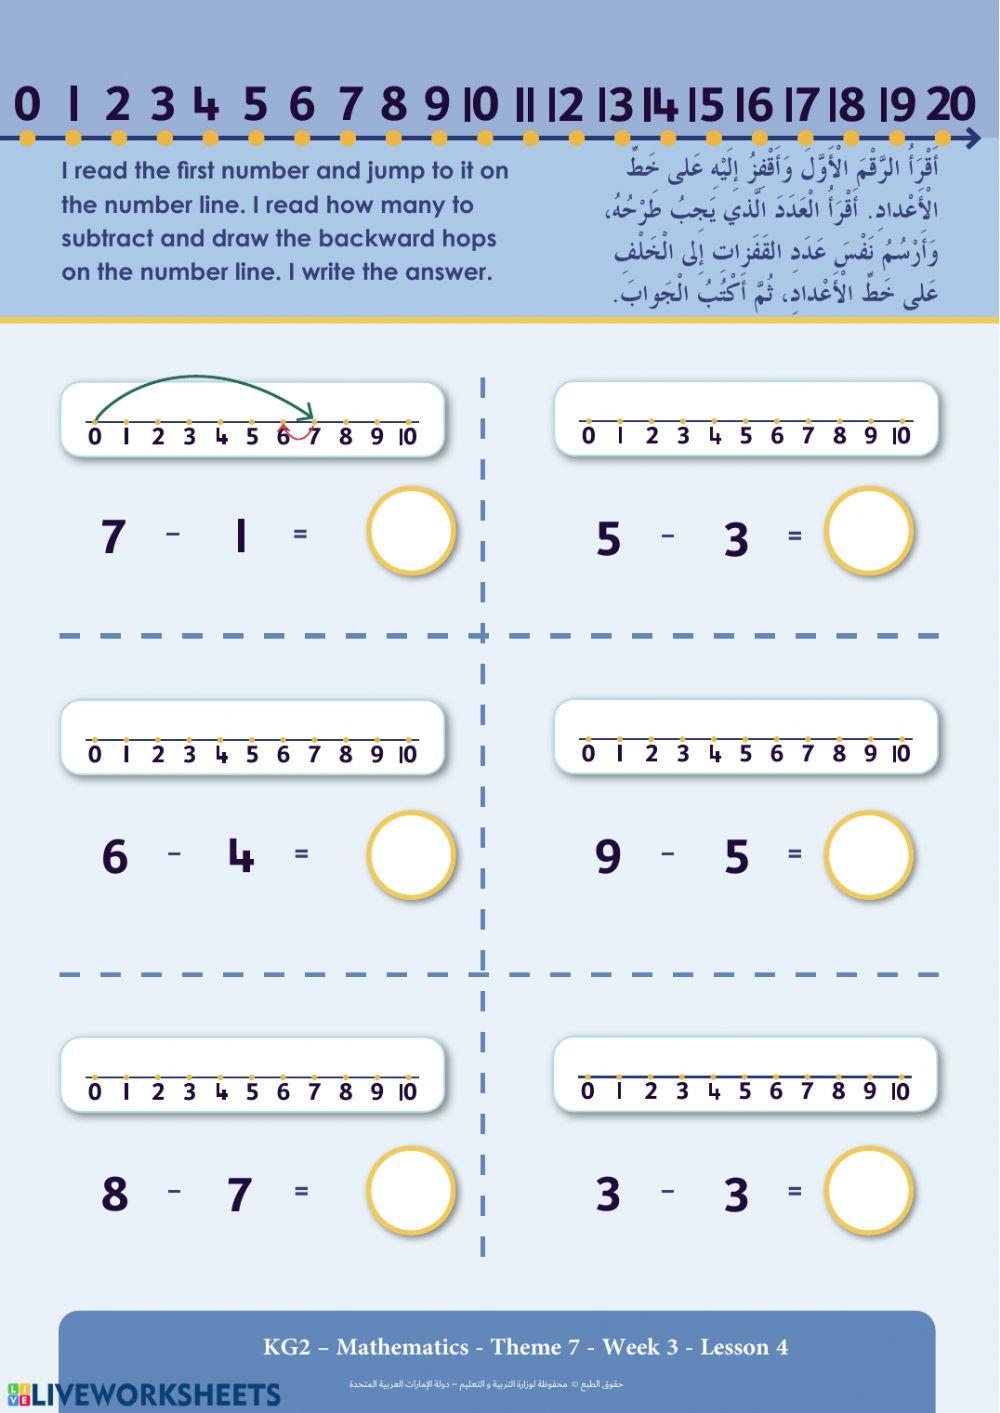 Subtraction with number line